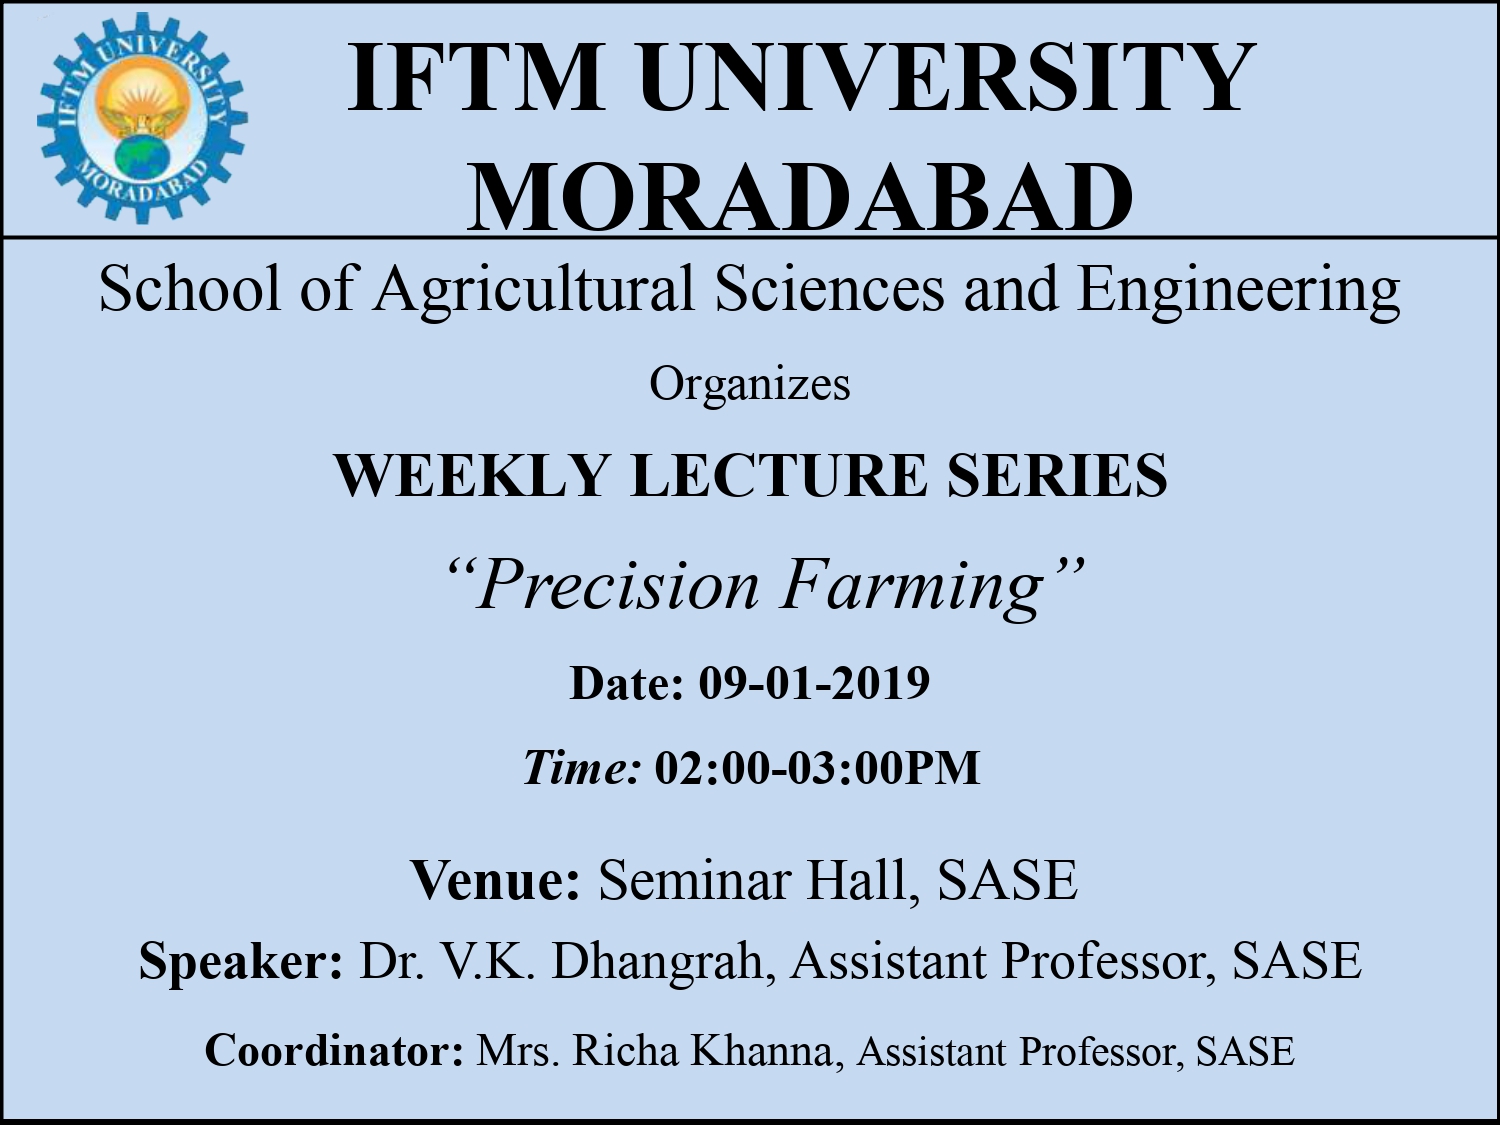 Weekly Lecture Series: “Precision Farming”